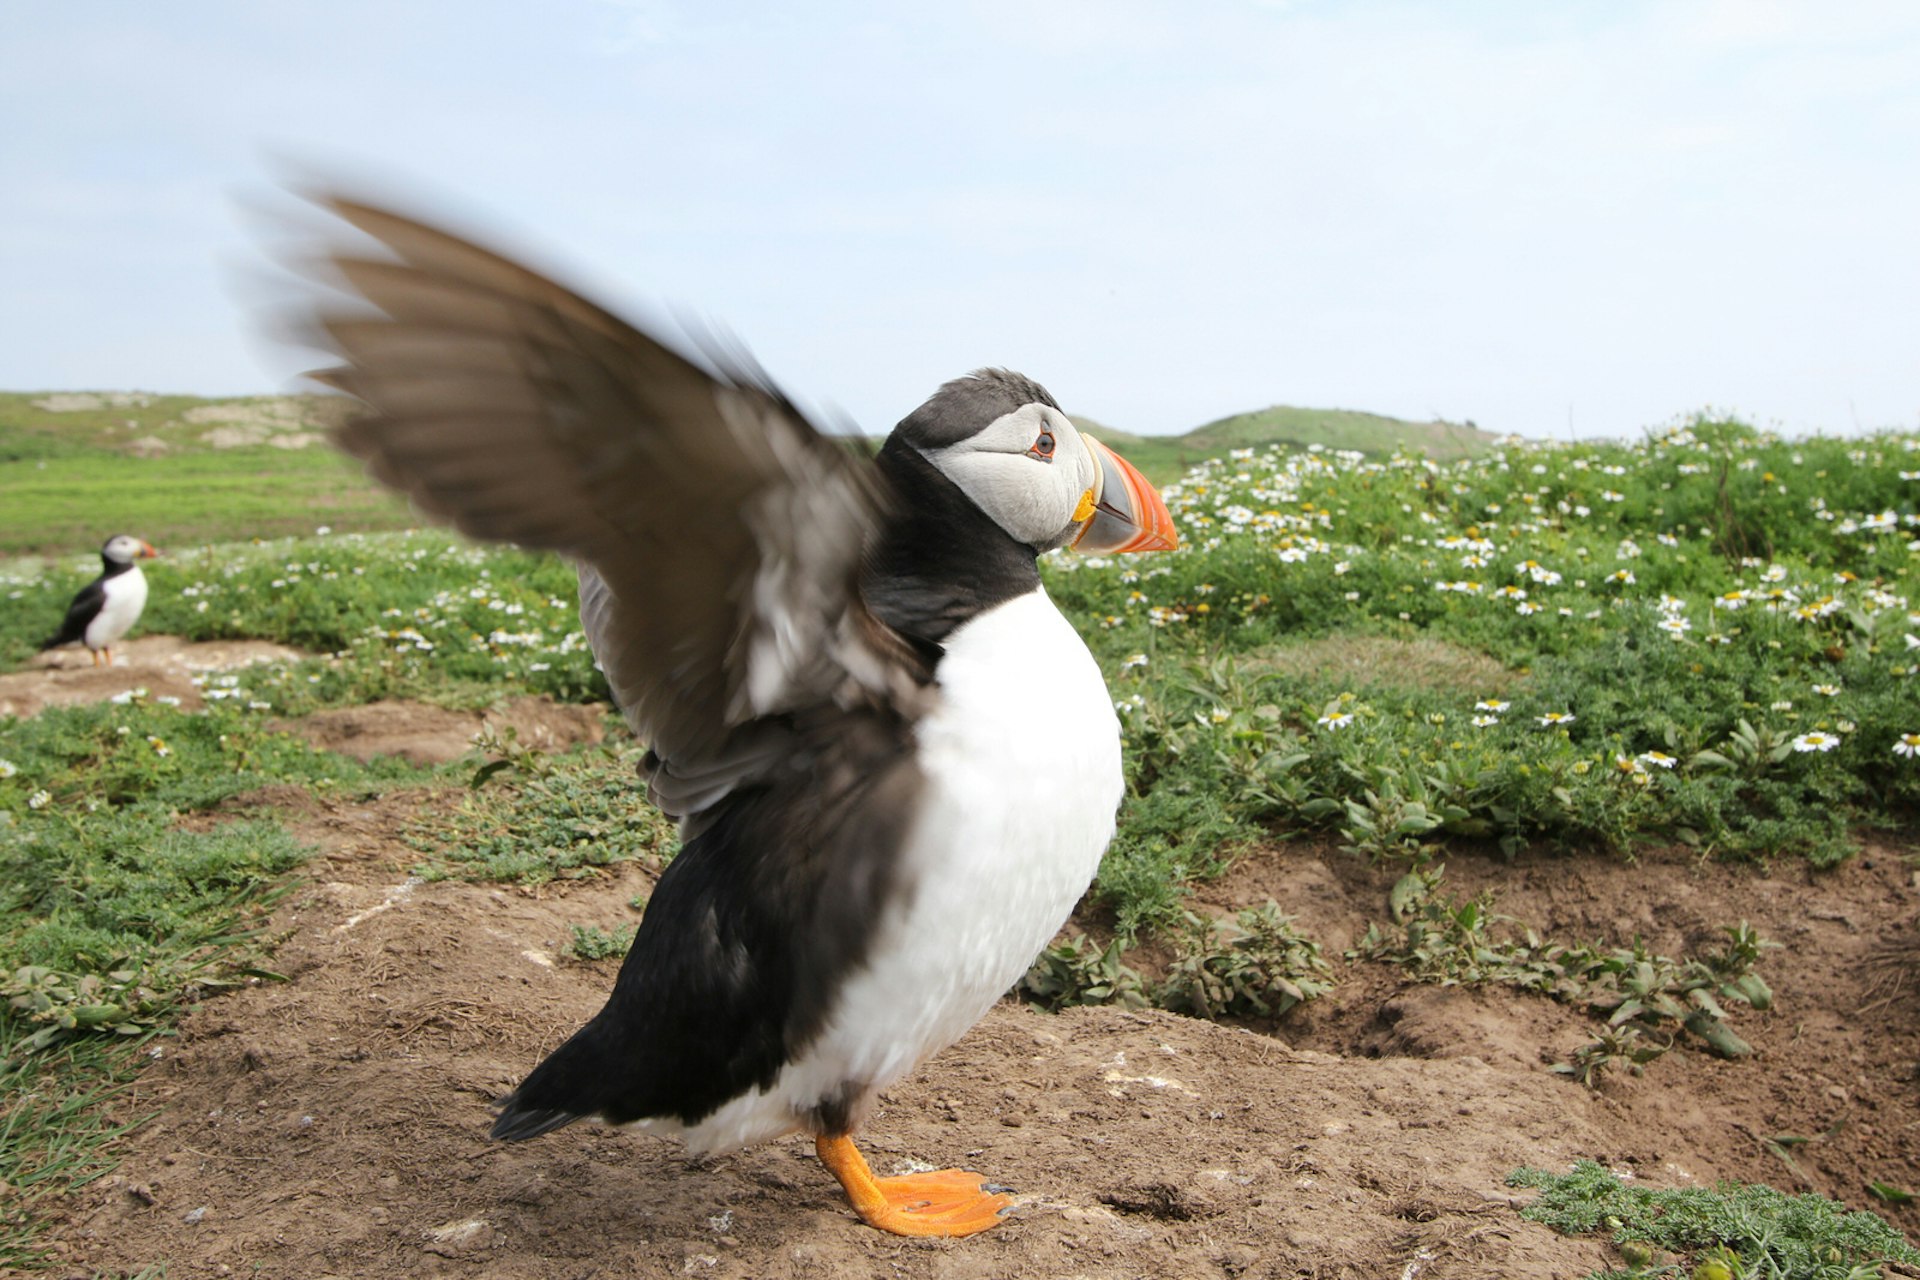 Puffins can beat their wings 400 times in a minute © Kerry Christiani / Lonely Planet